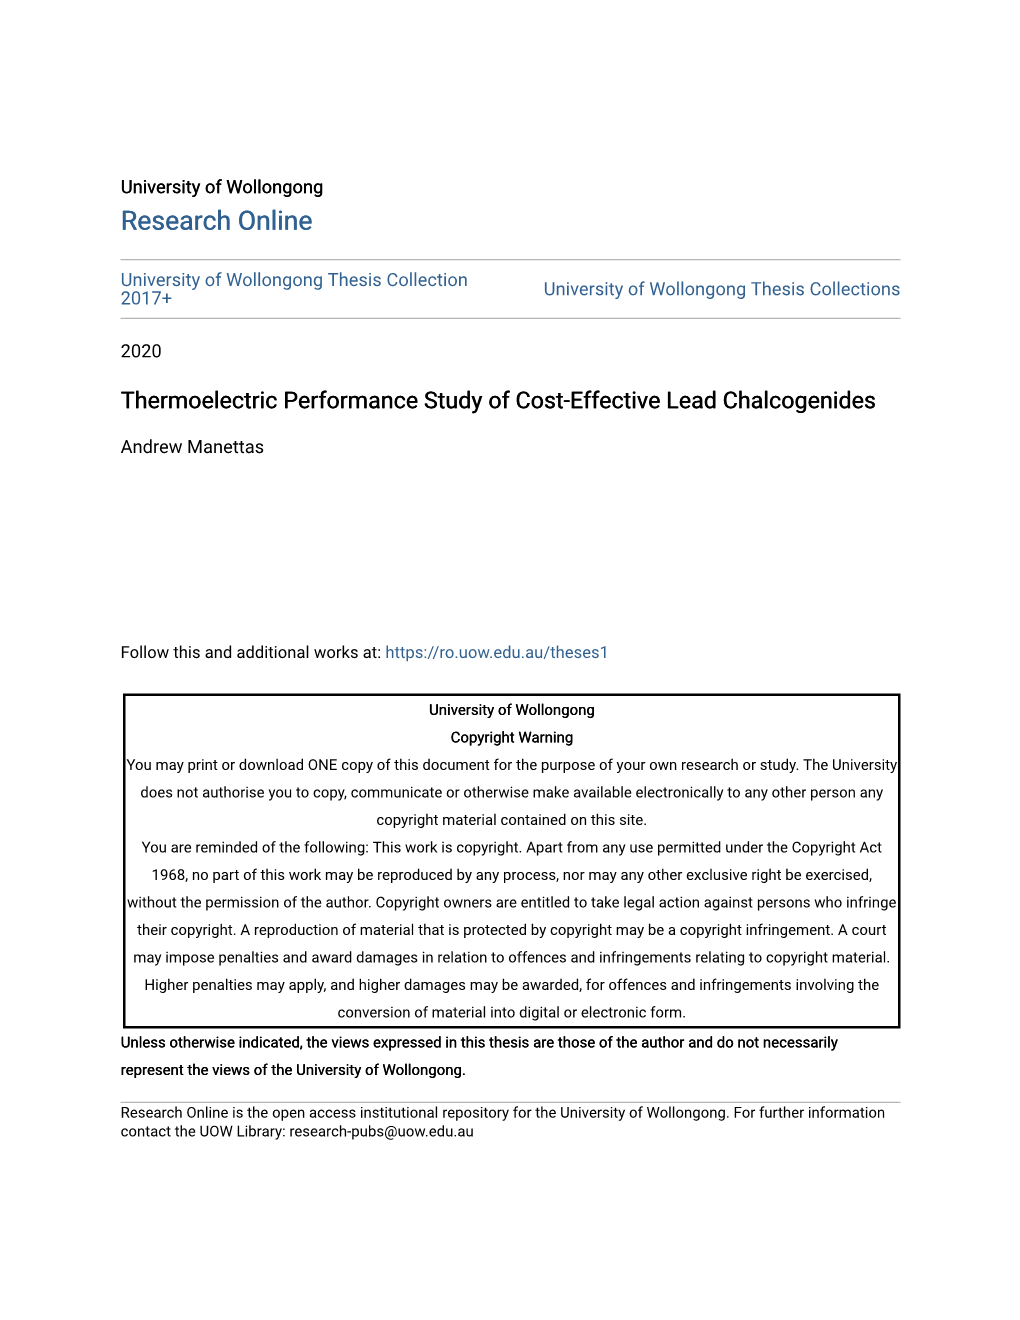 Thermoelectric Performance Study of Cost-Effective Lead Chalcogenides